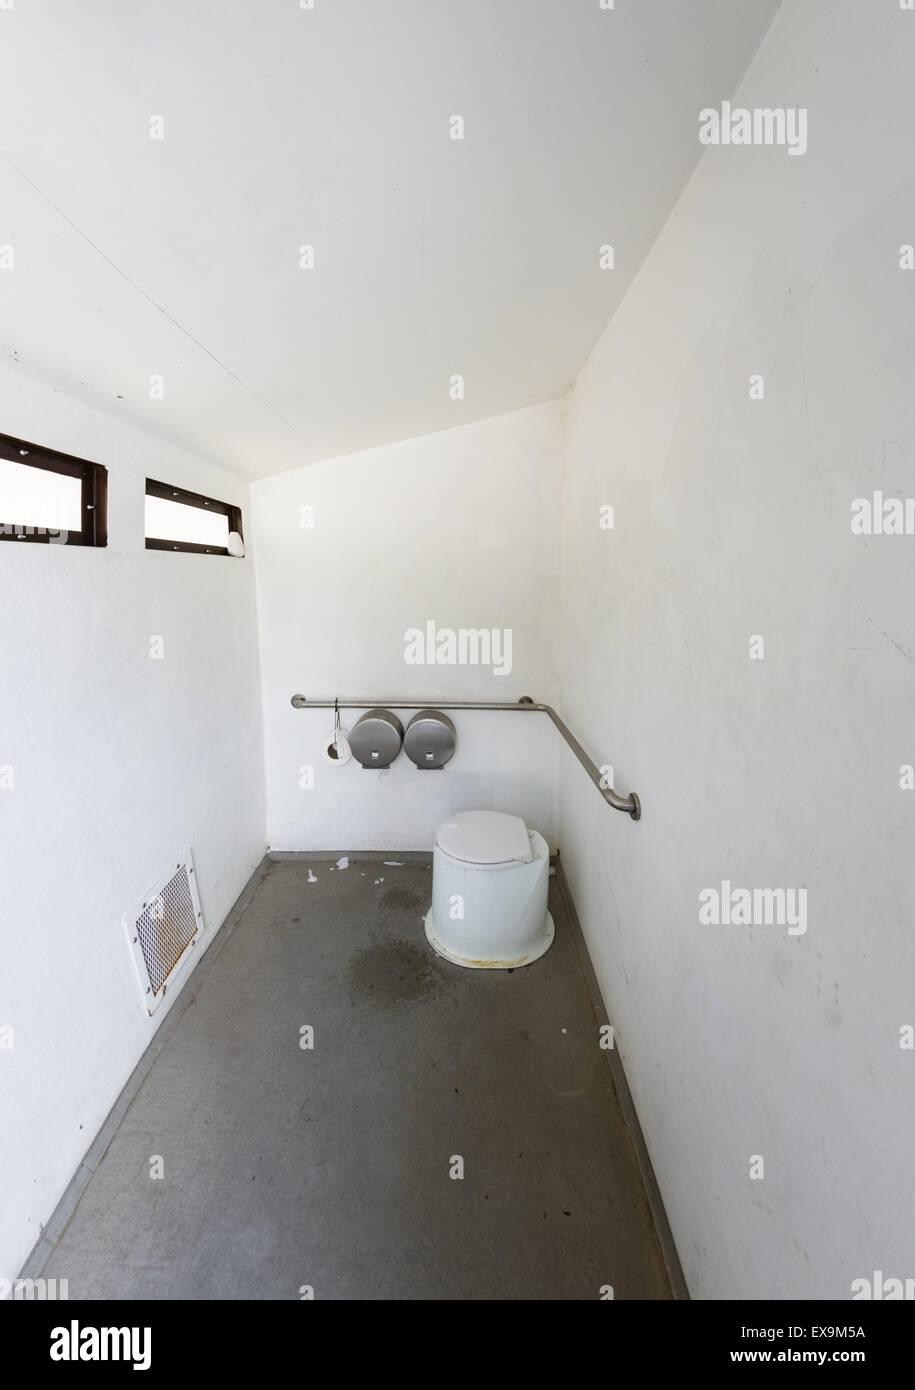 wide angle view of the interior of an outhouse pit toilet Stock Photo